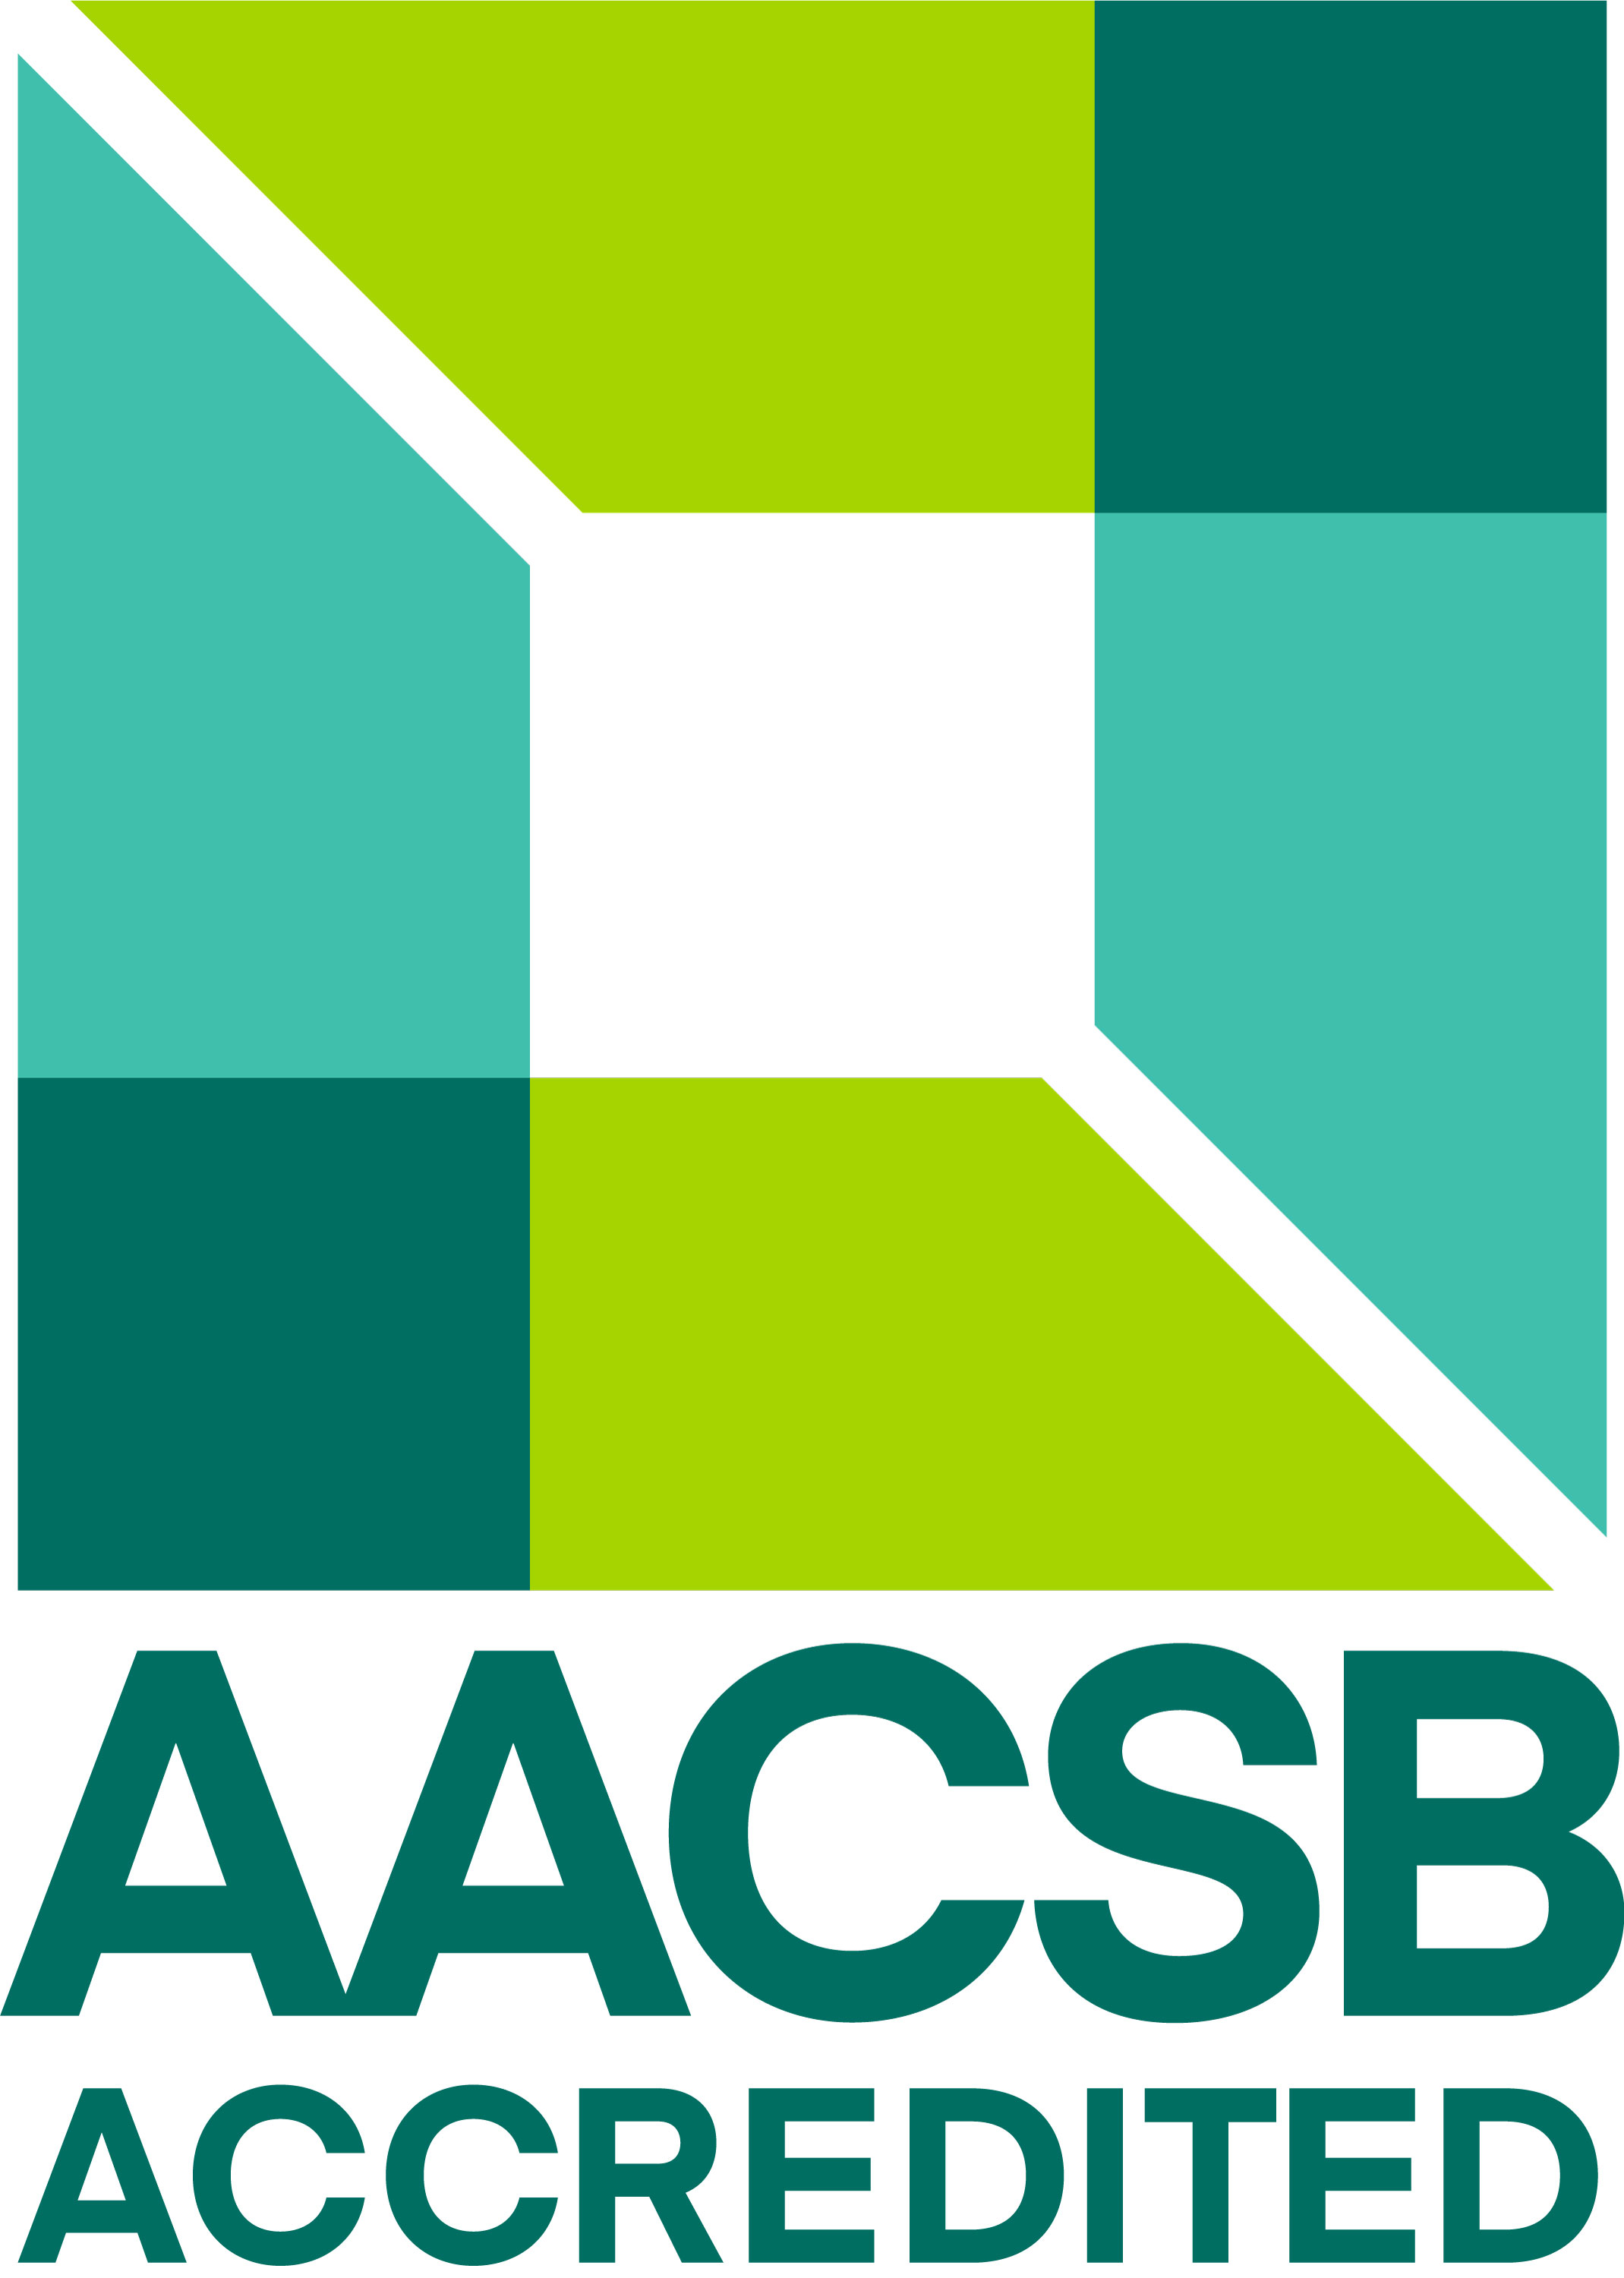 AACSB-logo-accredited-vert-color-RGB.jpg